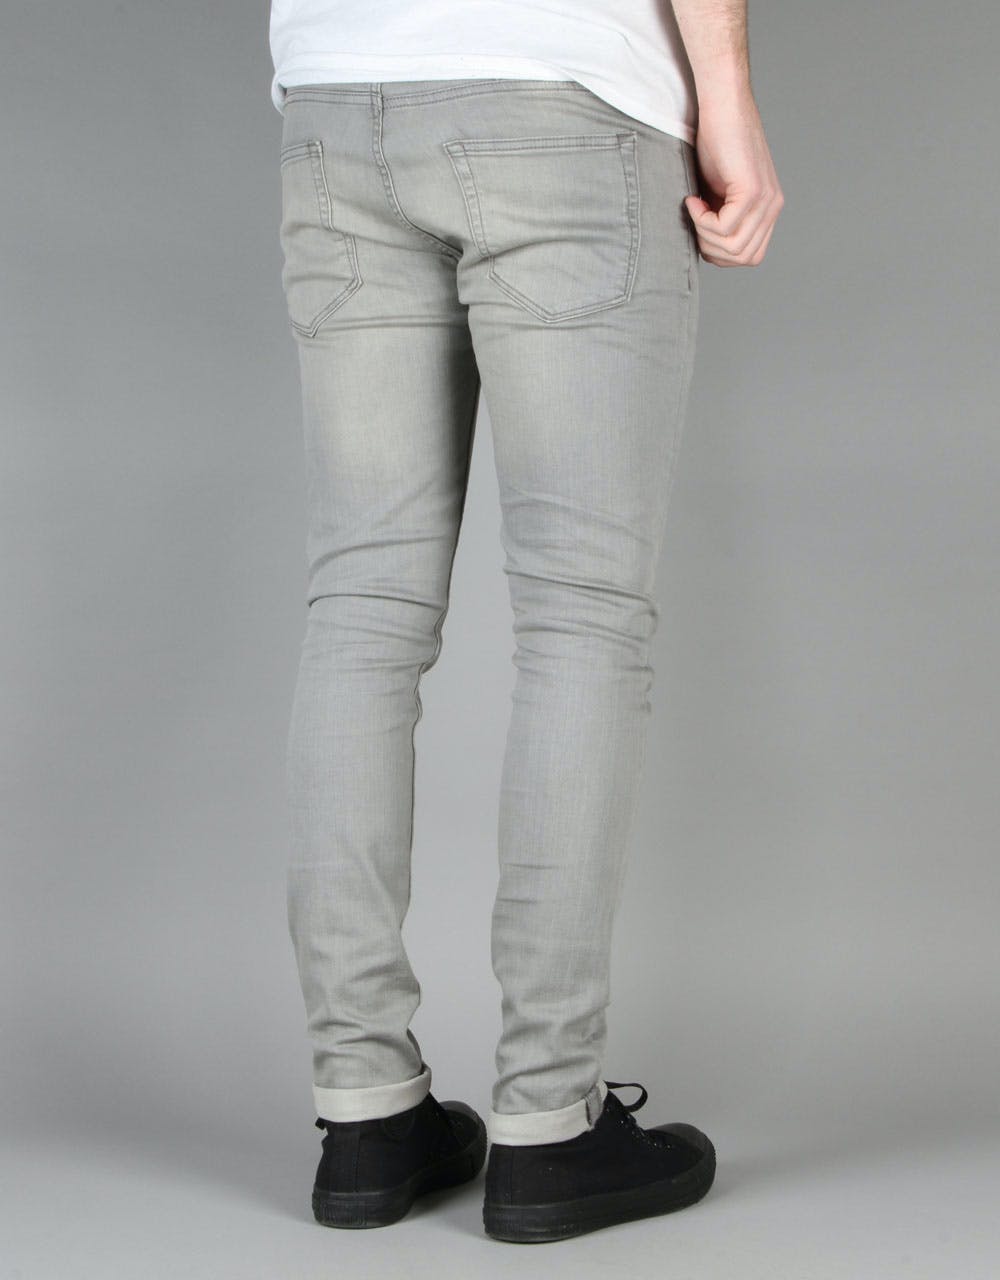 Route One Super Skinny Denim Jeans - Washed Grey